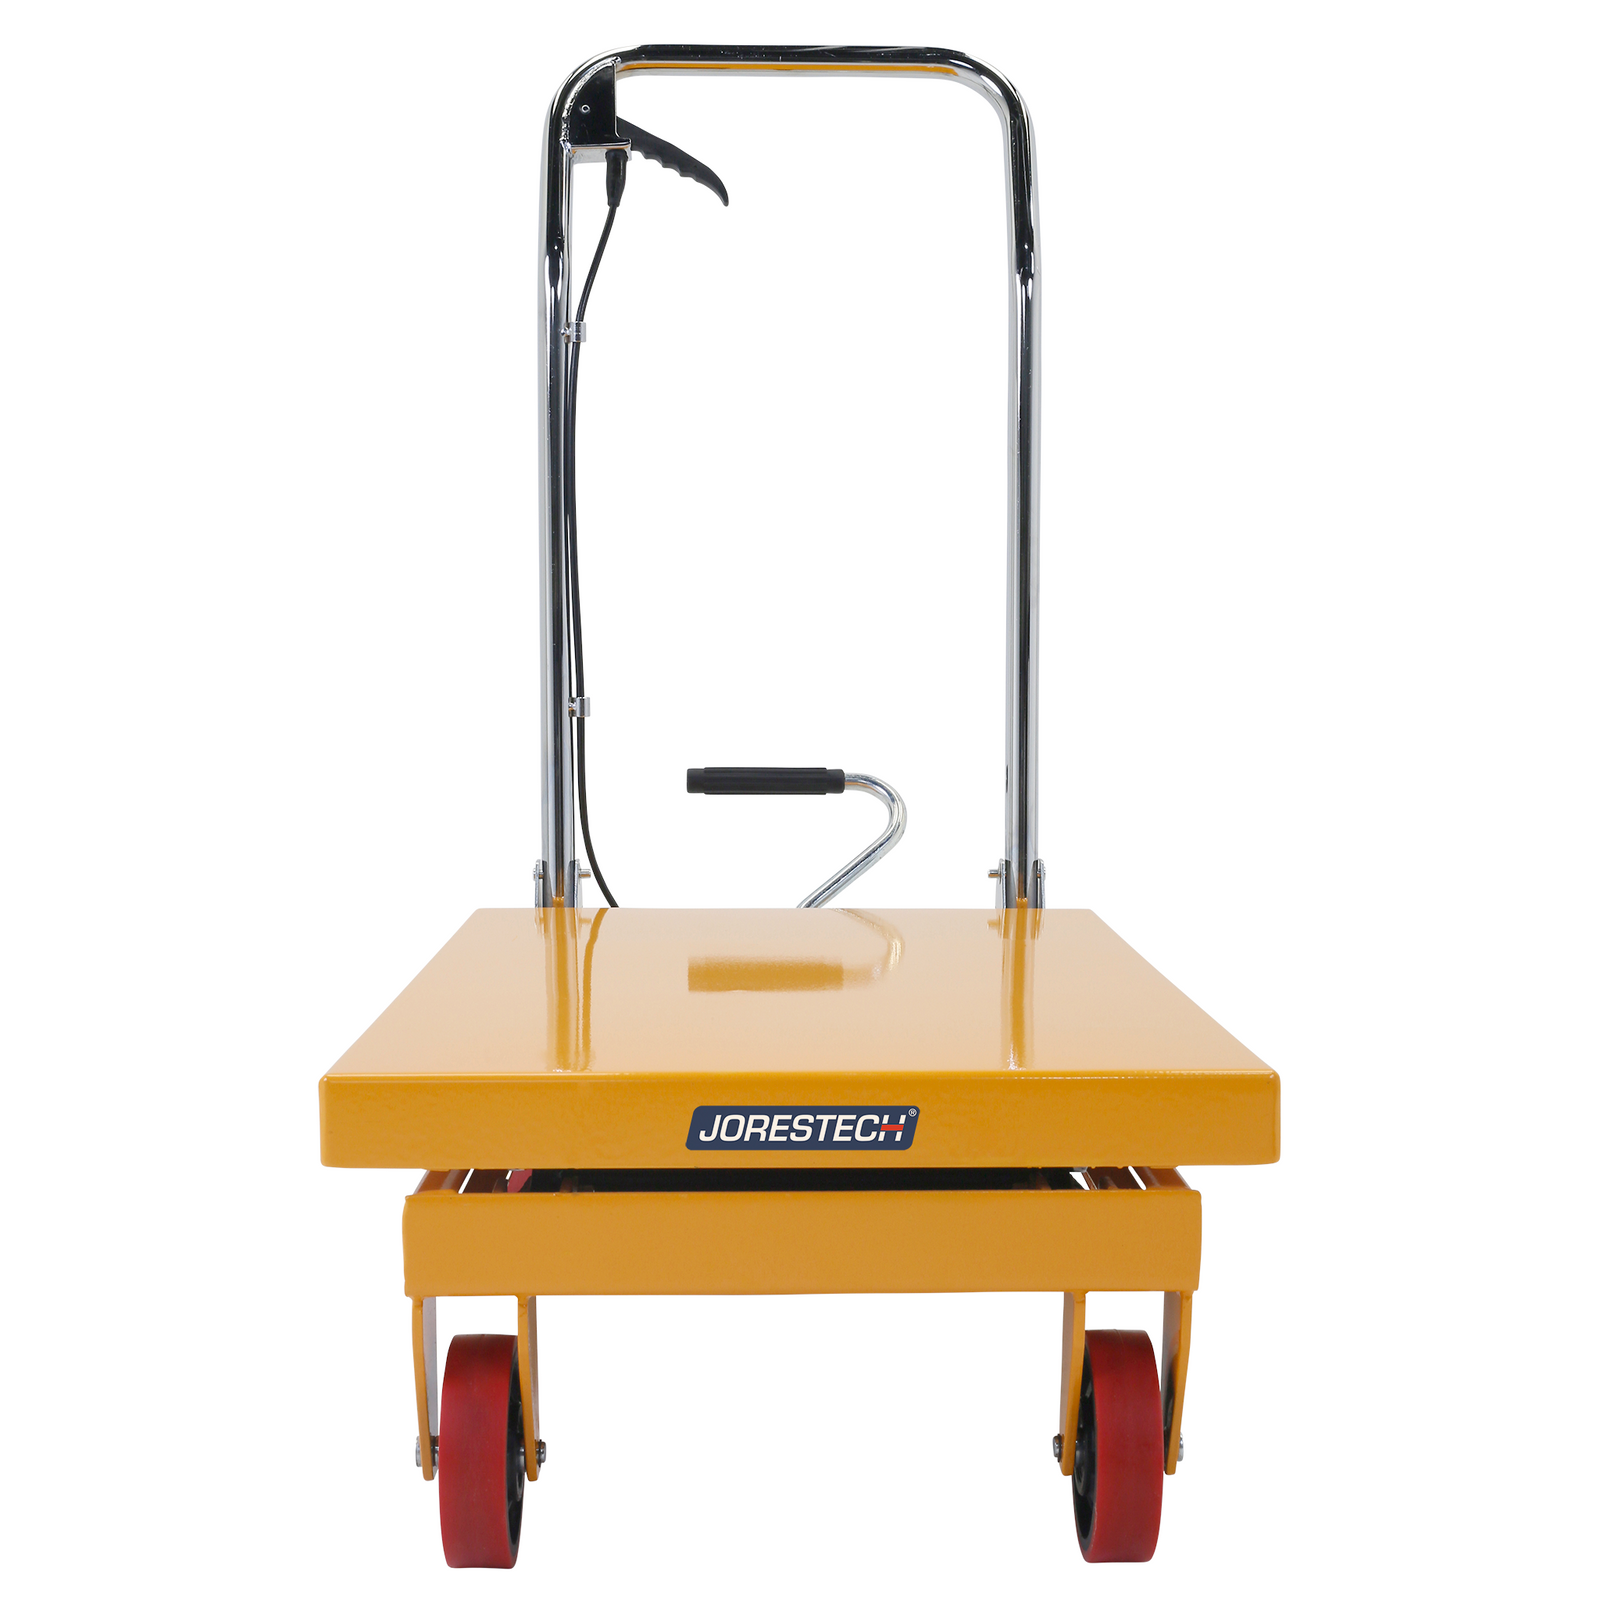 Black and yellow scissor table lift for 150 Kg. The table is completely collapsed